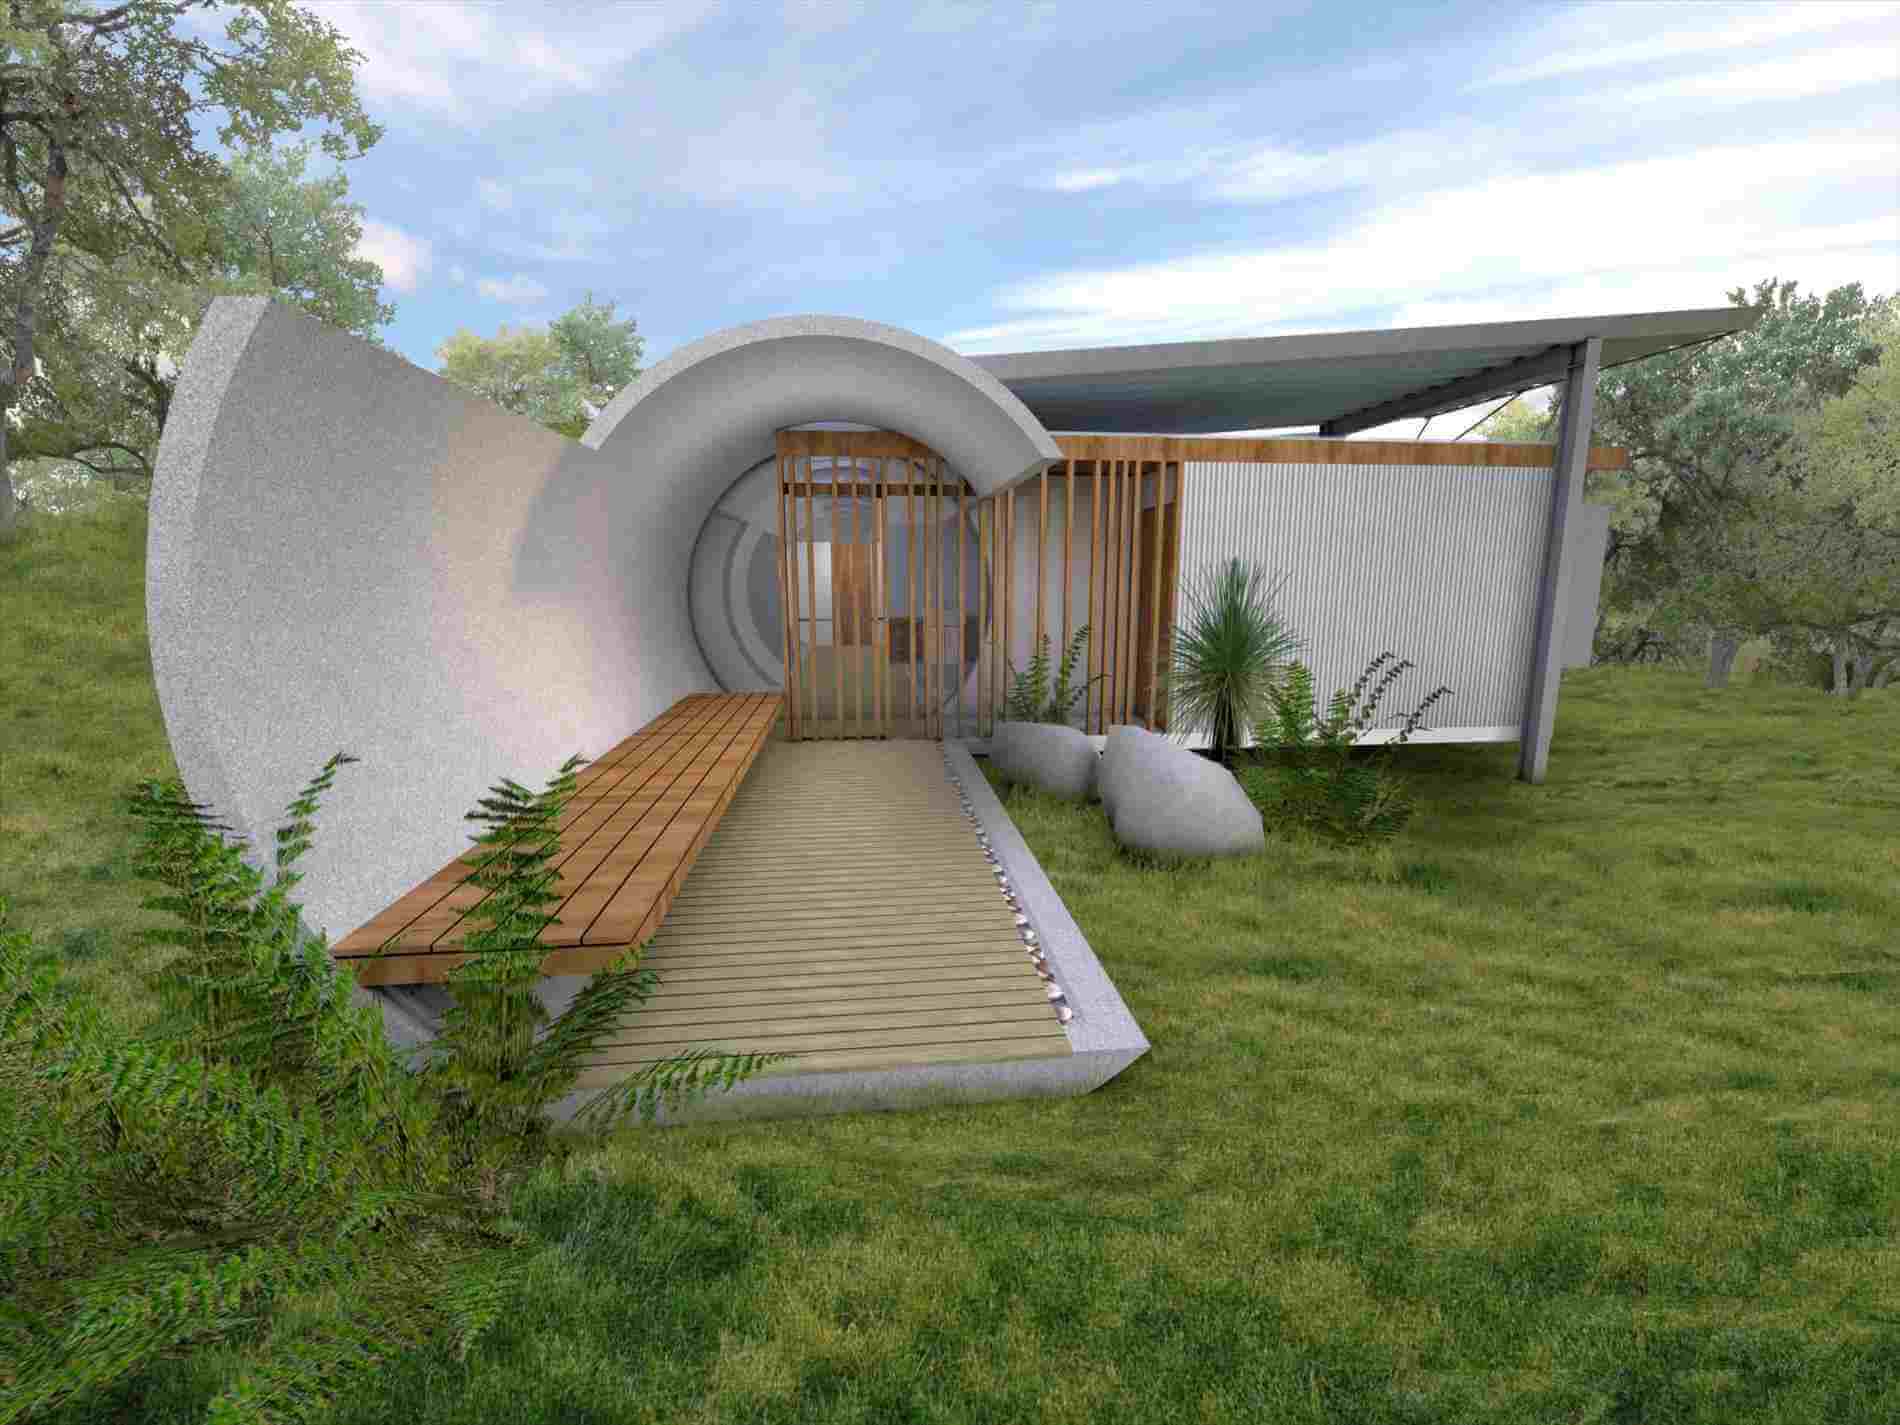 Some Amazing Underground House Design That You Can Also Have